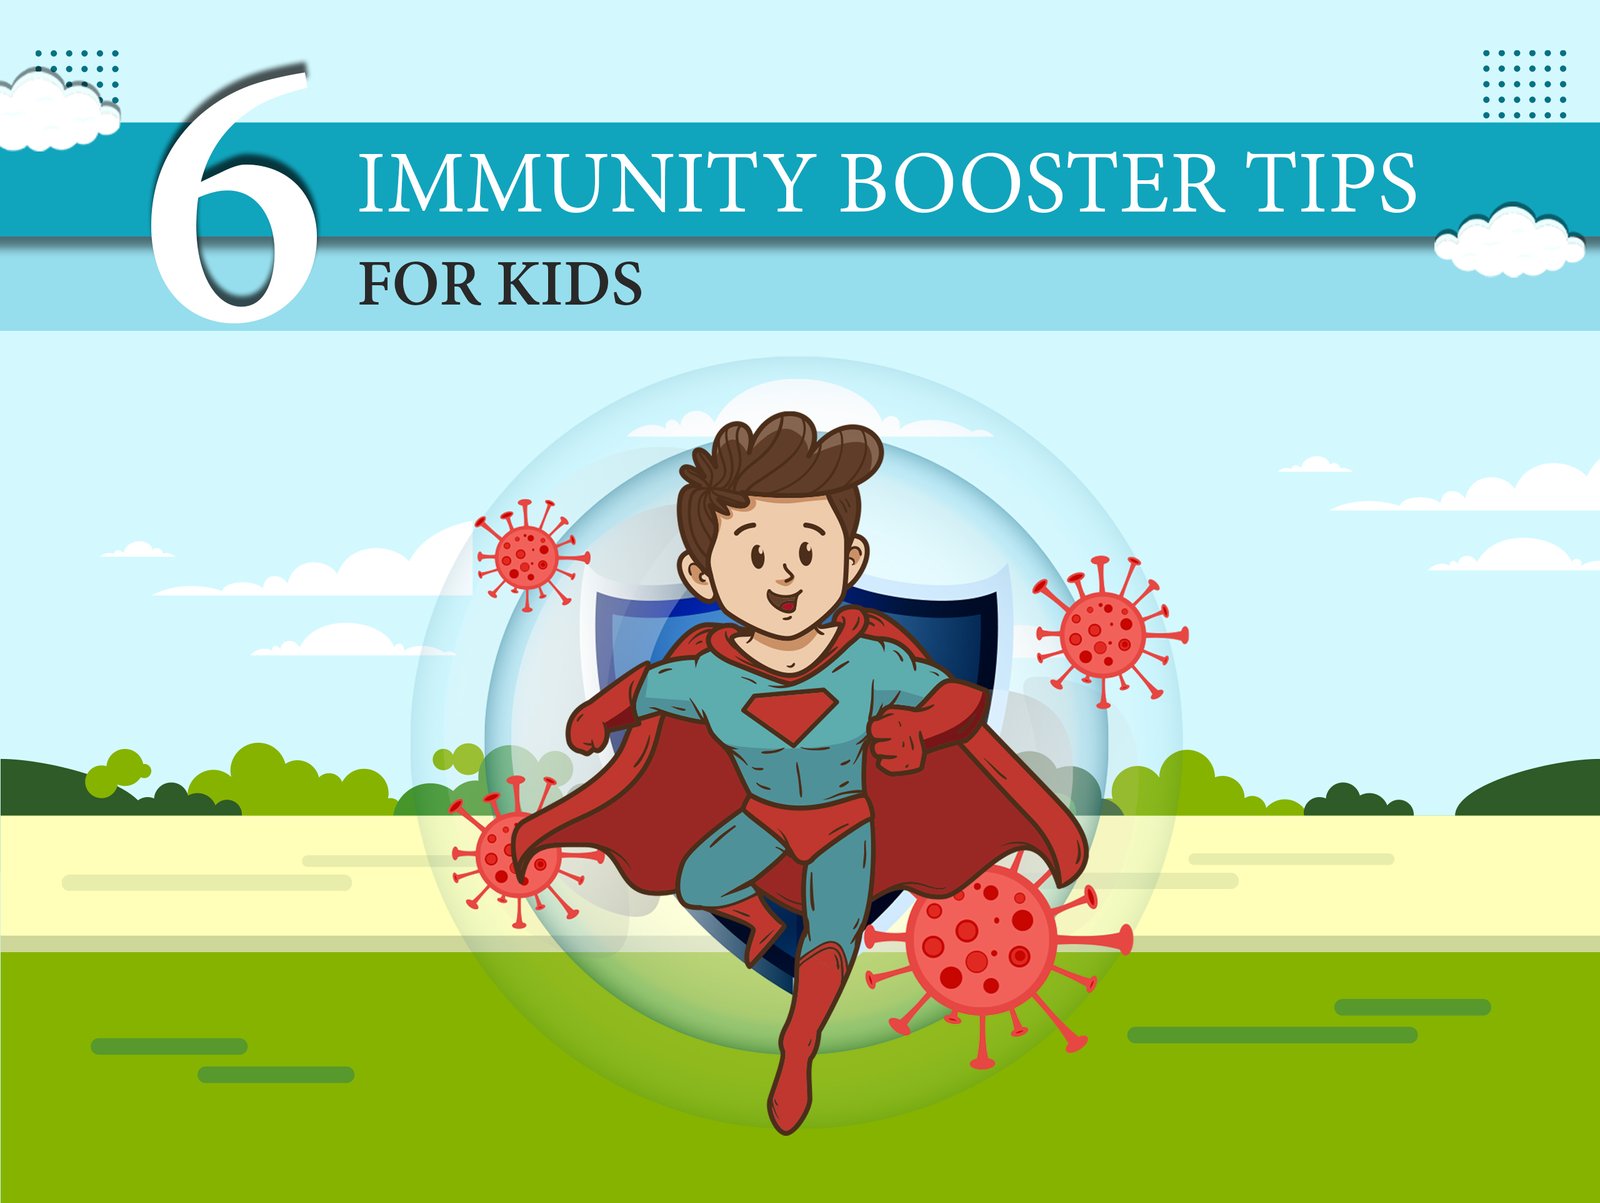 immunity boosters for kids poster